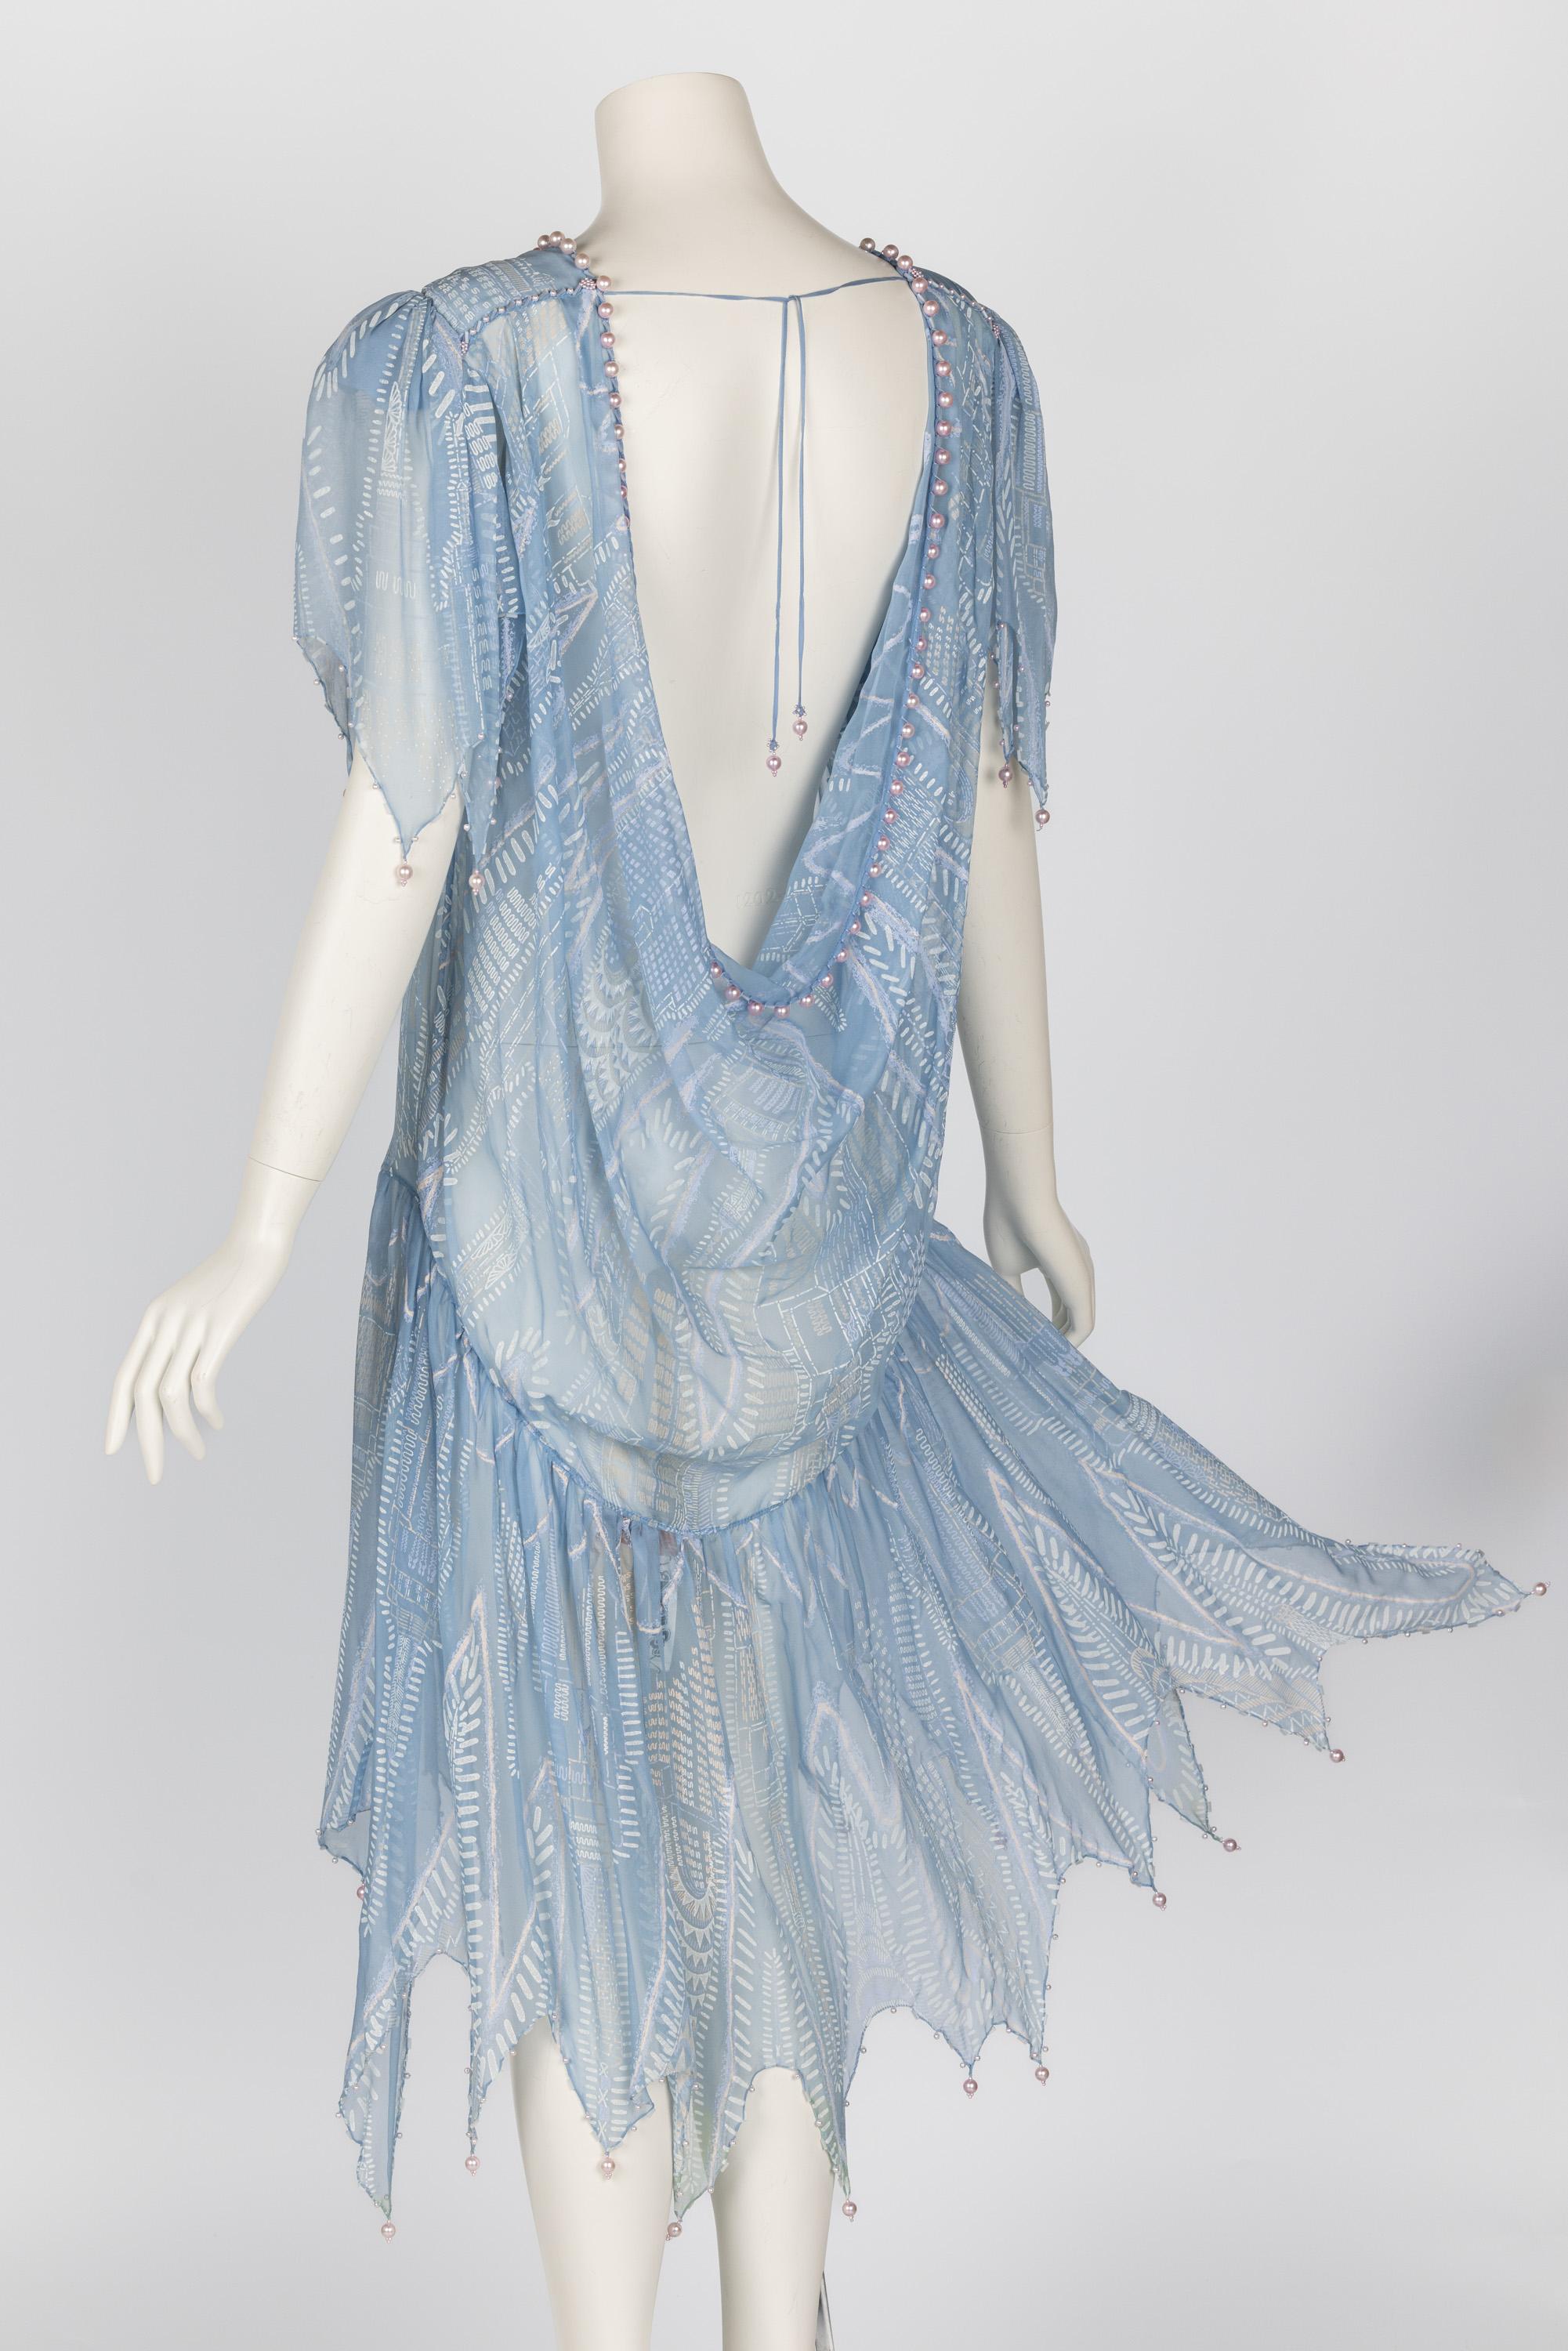 Zandra Rhodes Light Blue Hand Printed Sheer Silk Pearl Beaded Dress Museum Piece In Excellent Condition For Sale In Boca Raton, FL